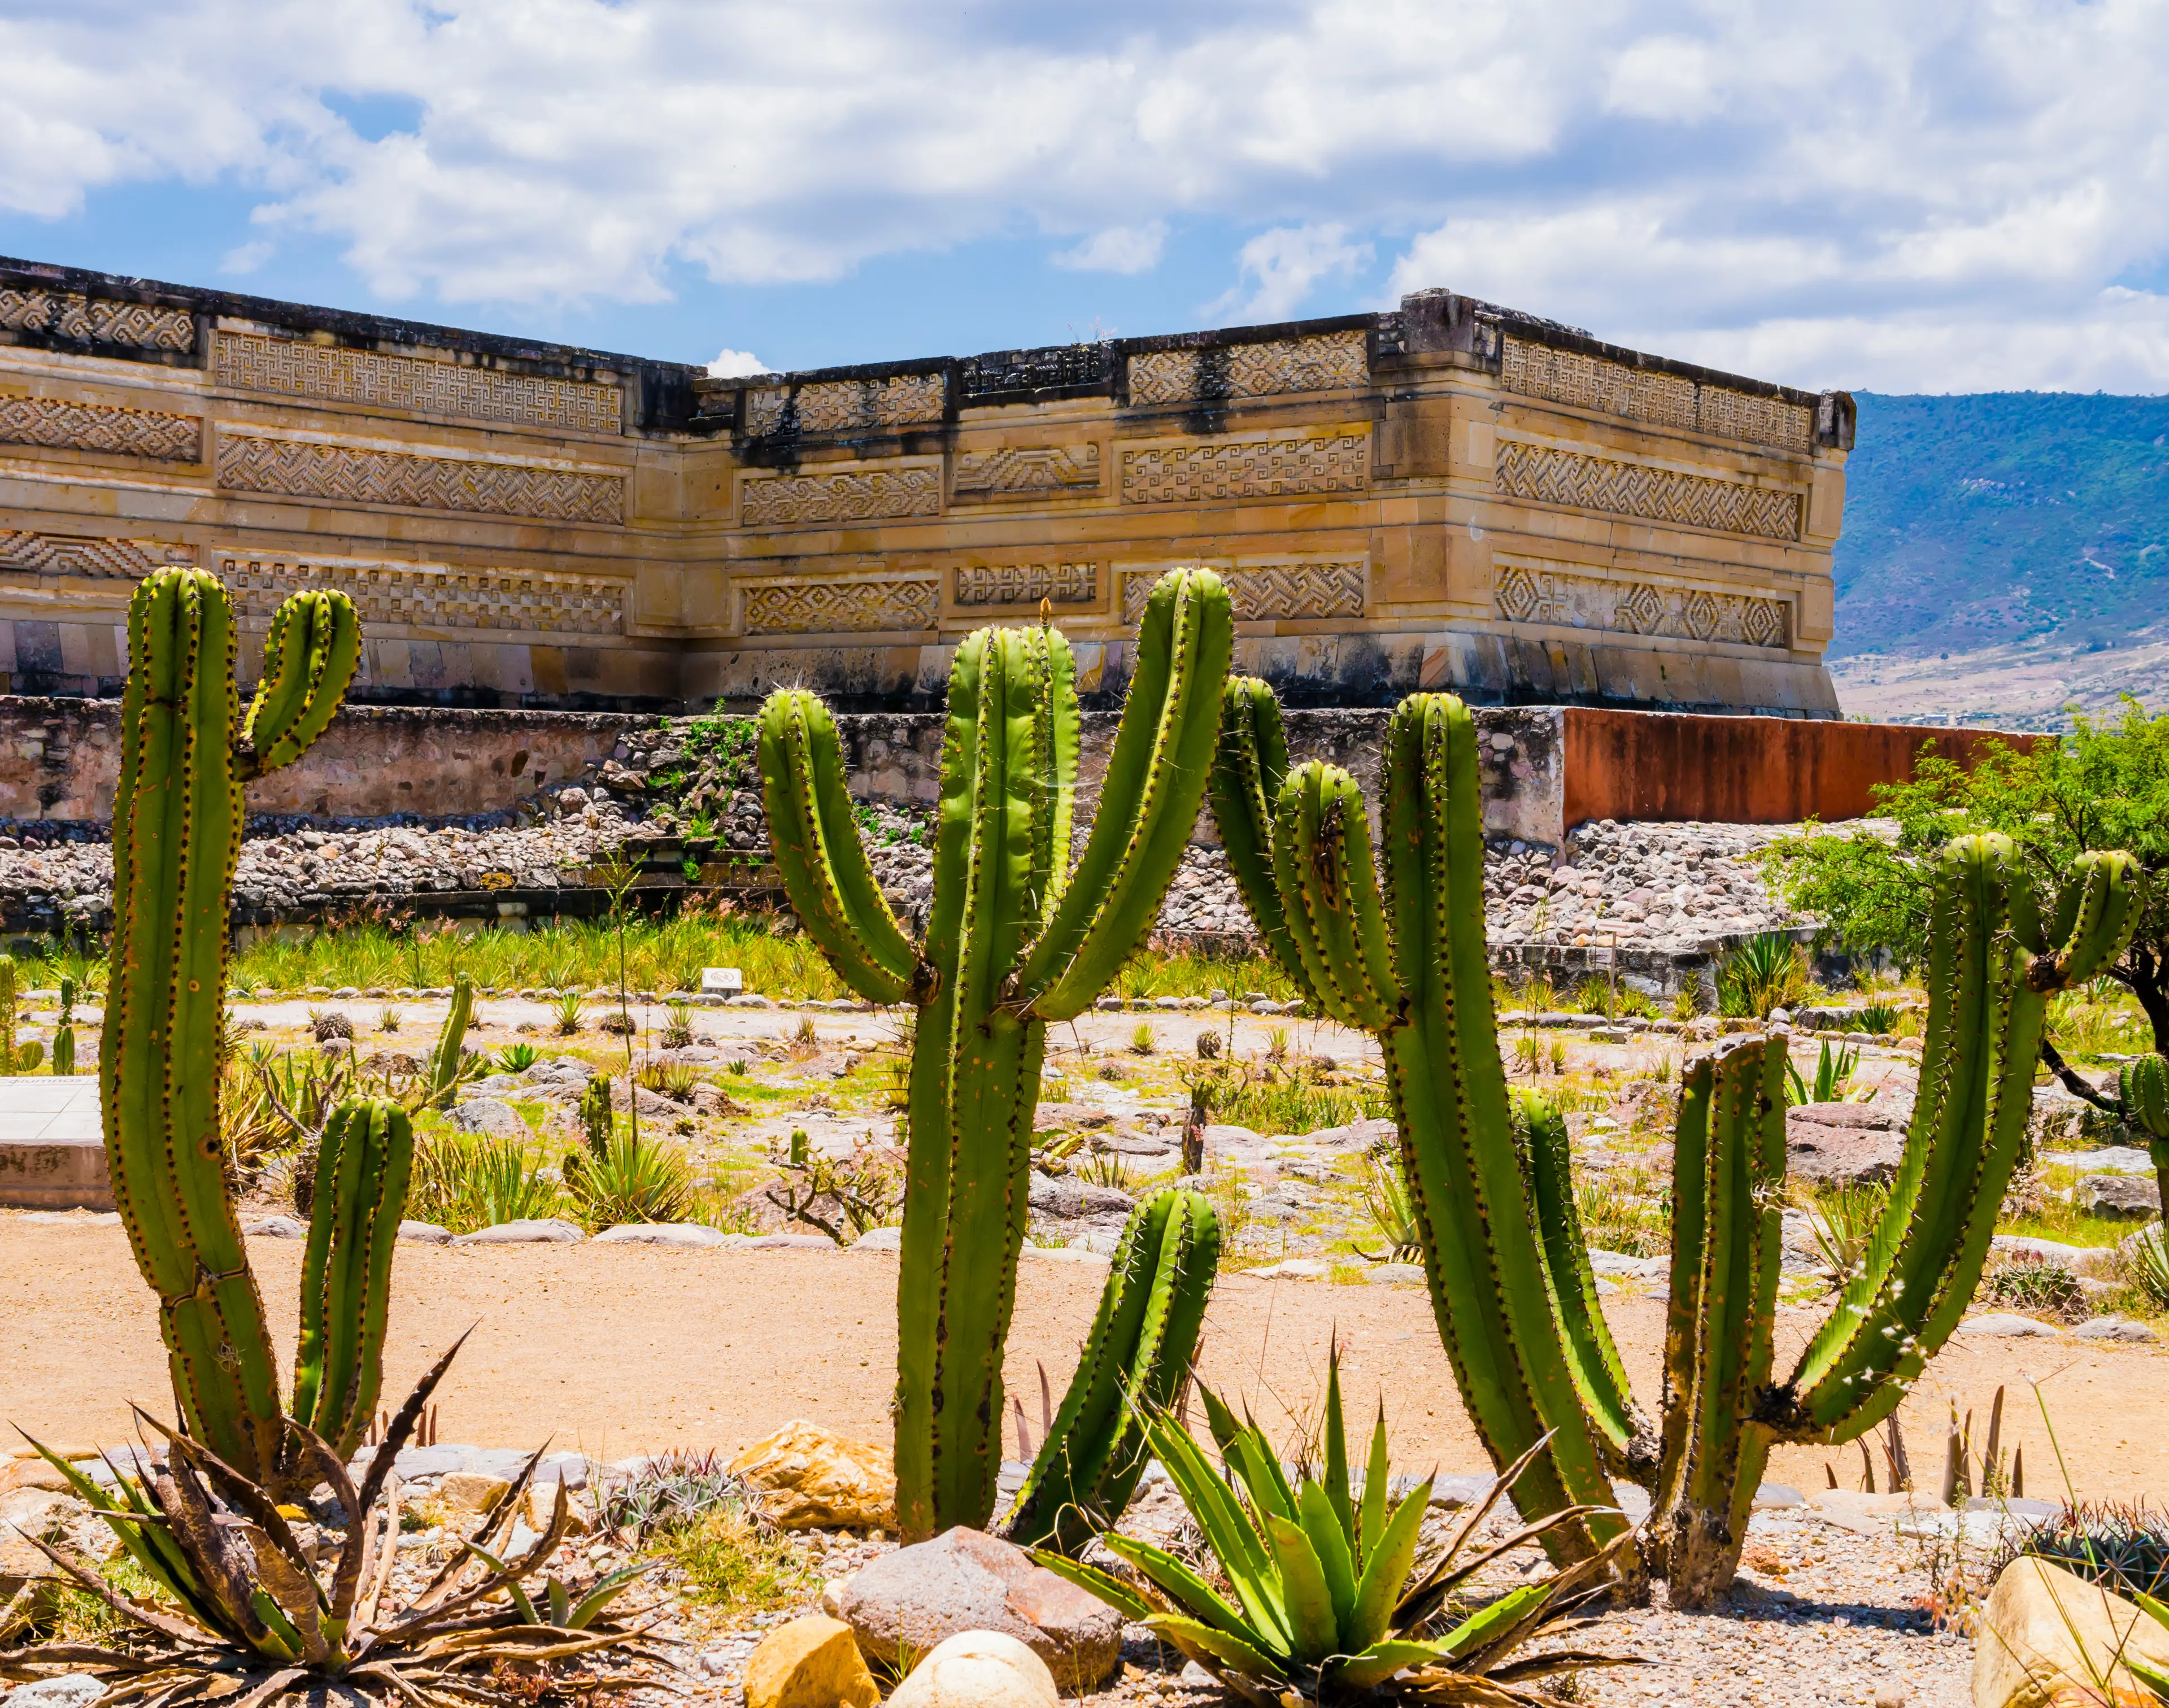 Archaeological site of Mitla